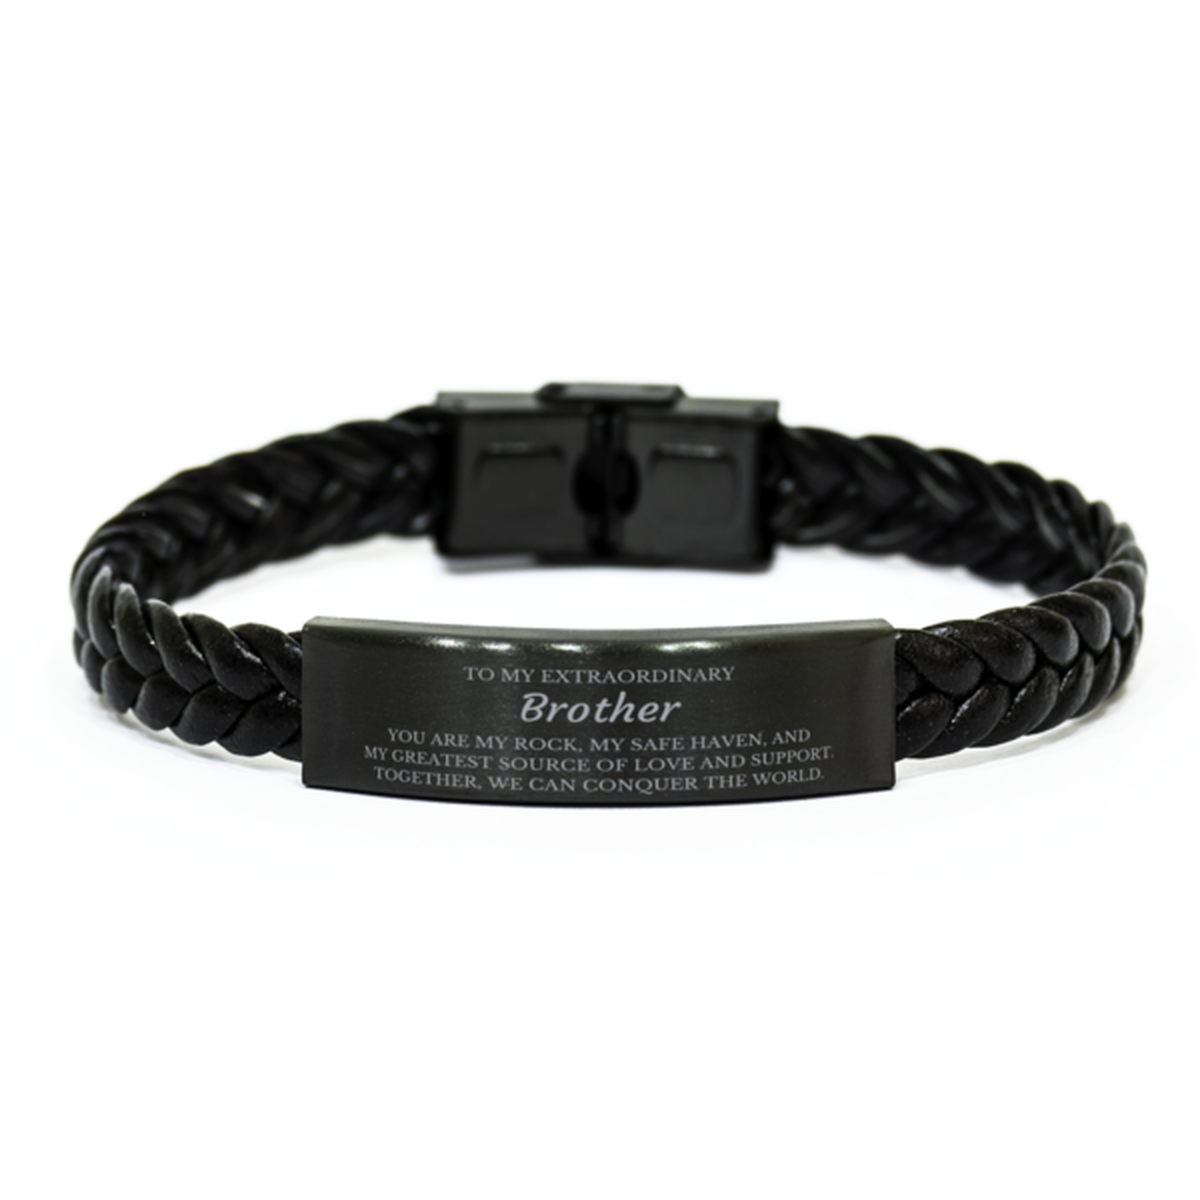 To My Extraordinary Brother Gifts, Together, we can conquer the world, Birthday Braided Leather Bracelet For Brother, Christmas Gifts For Brother